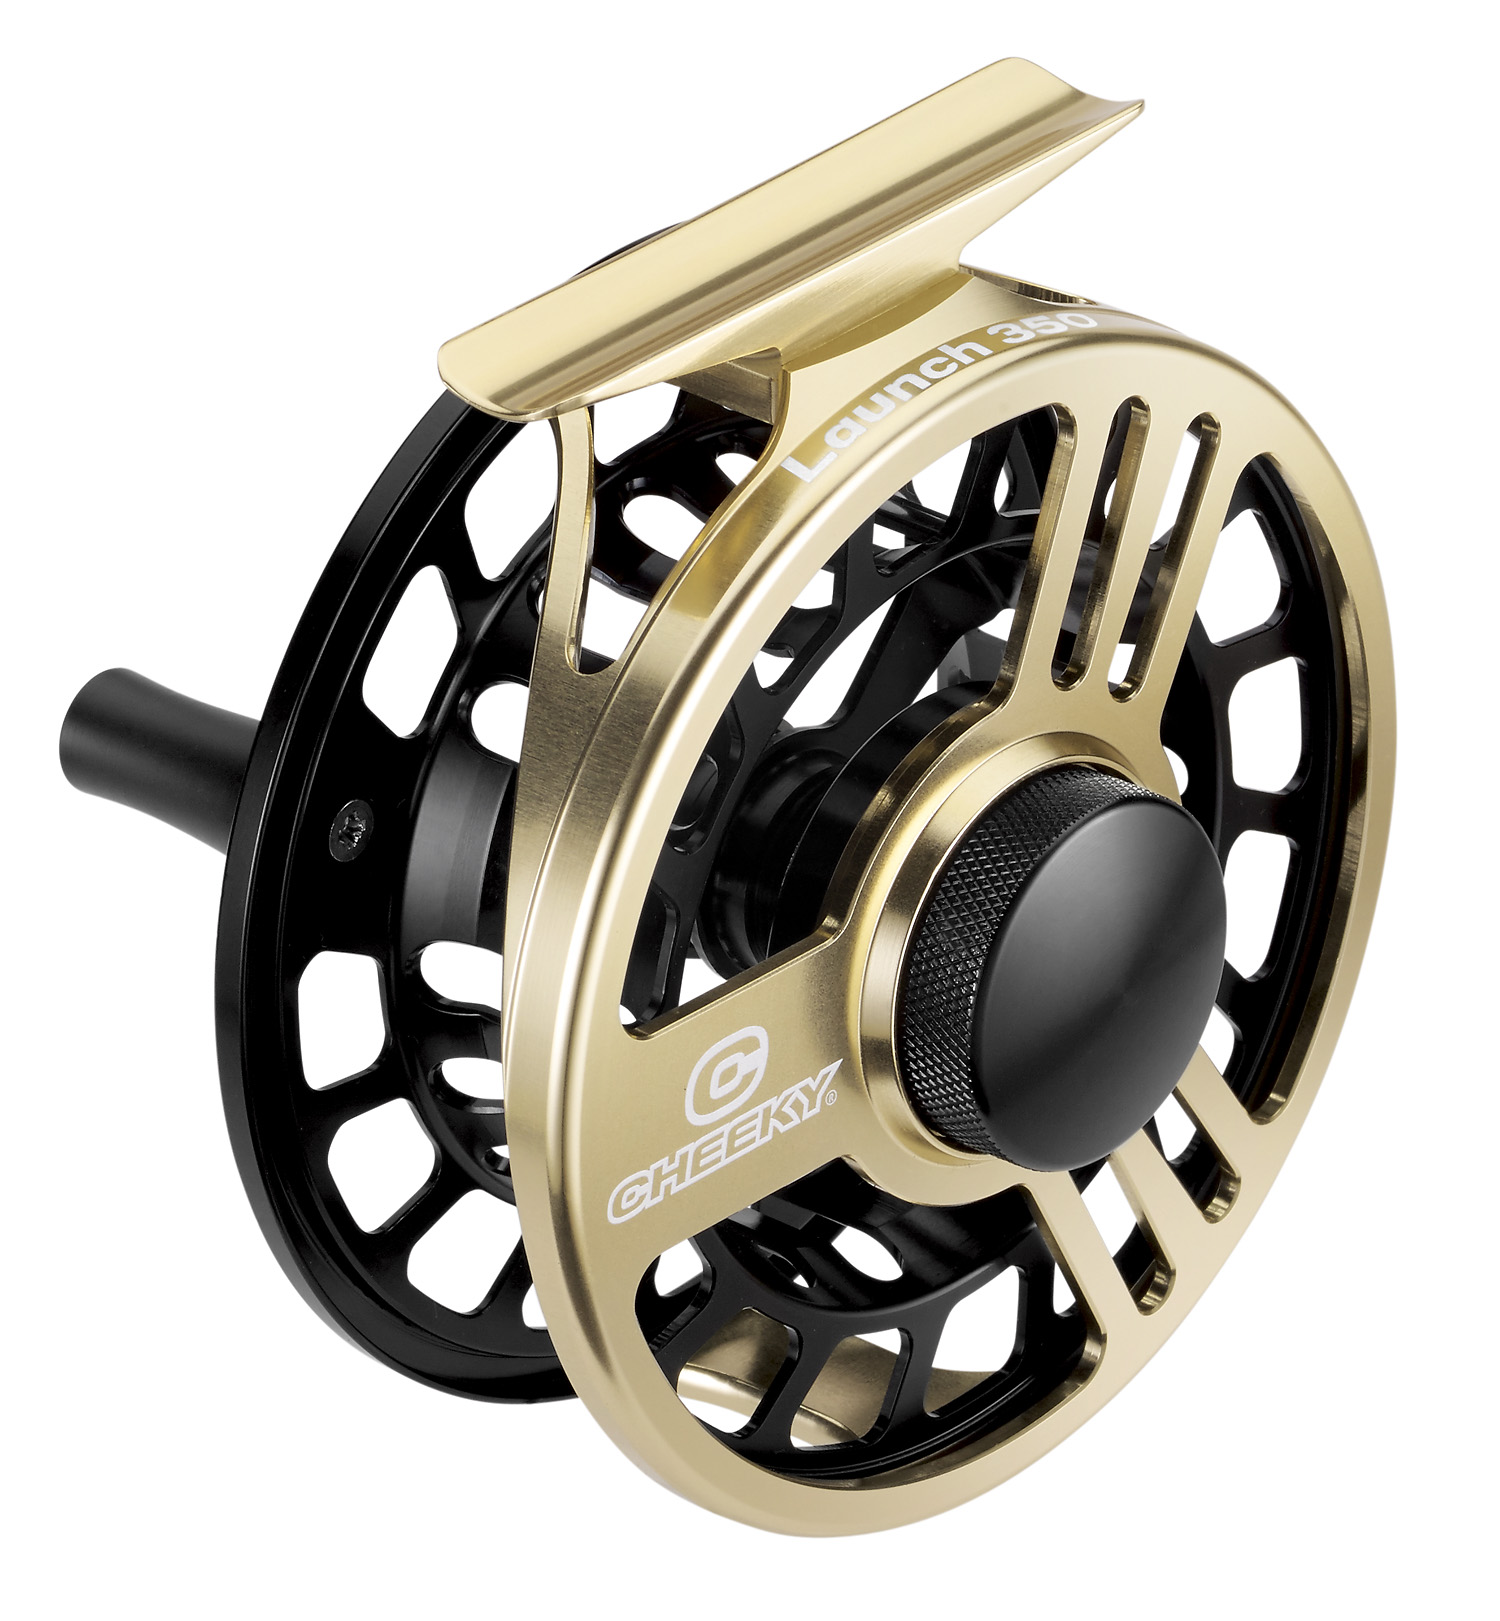 Best Sellers of 2020 Cheeky Fishing and a fly reel